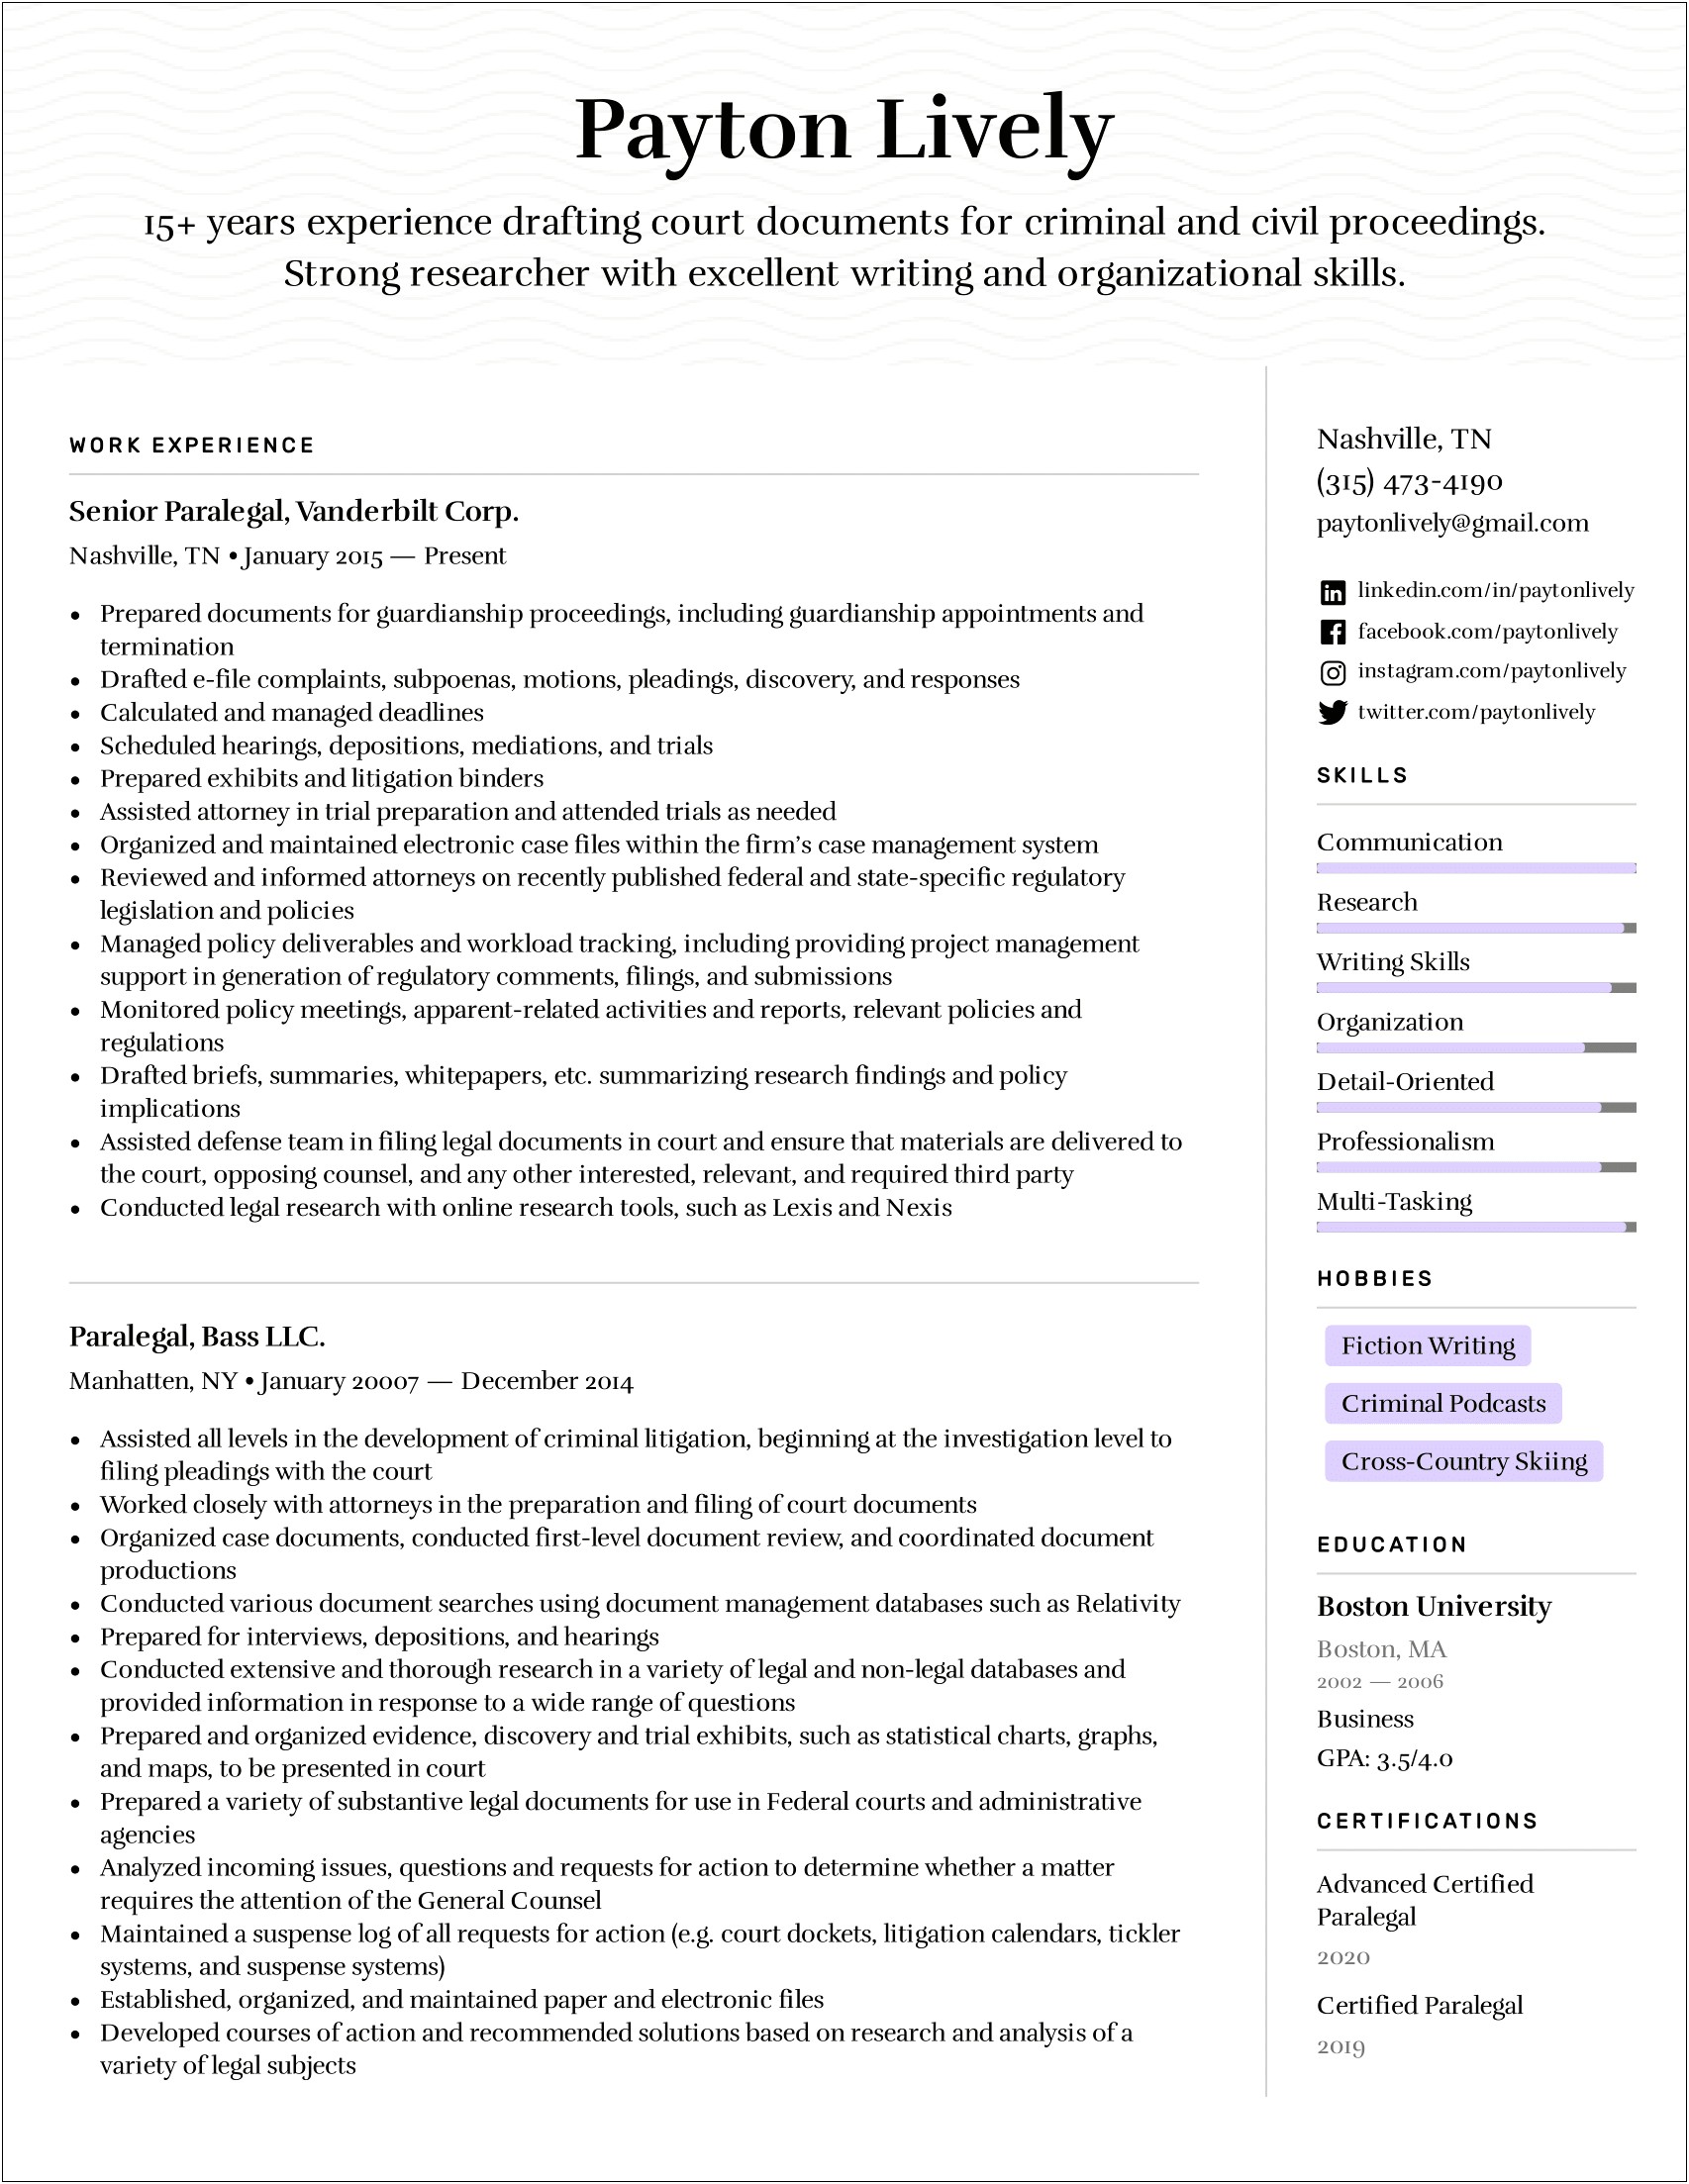 Email Example Sending Paralegal Resume